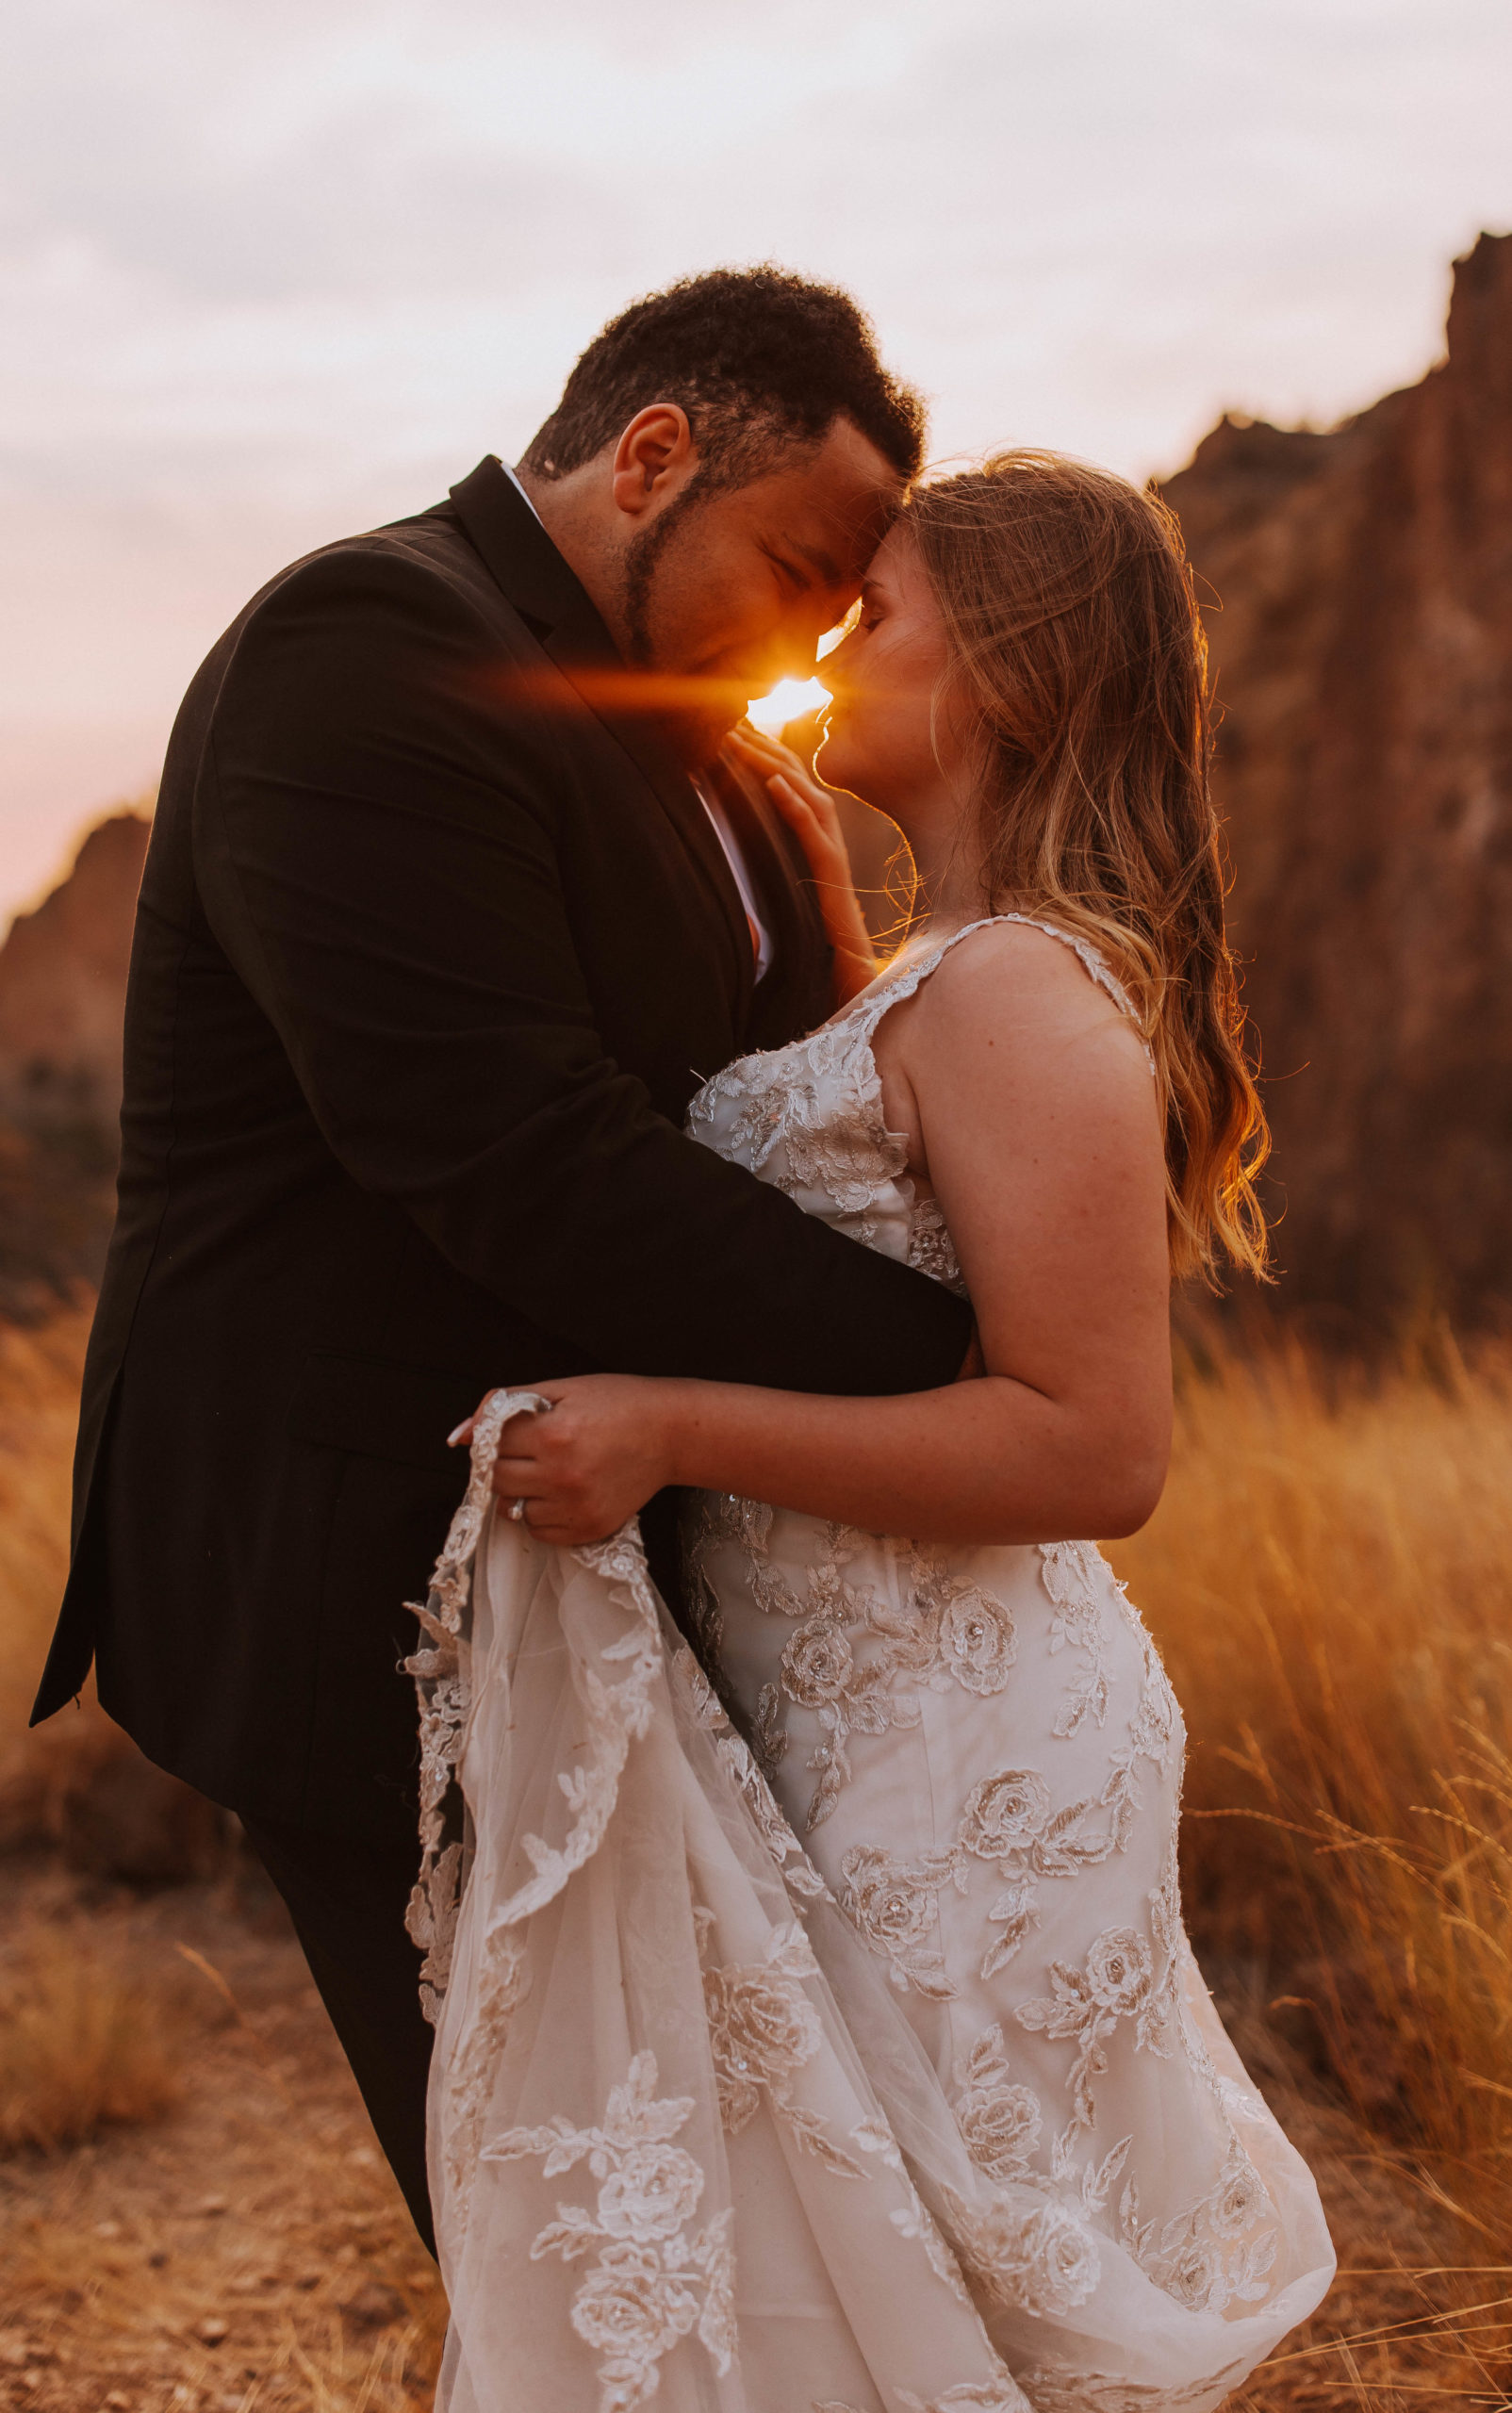 The bride and groom lean in to share a kiss during golden hour in front of the sun as it shine through the brides hair